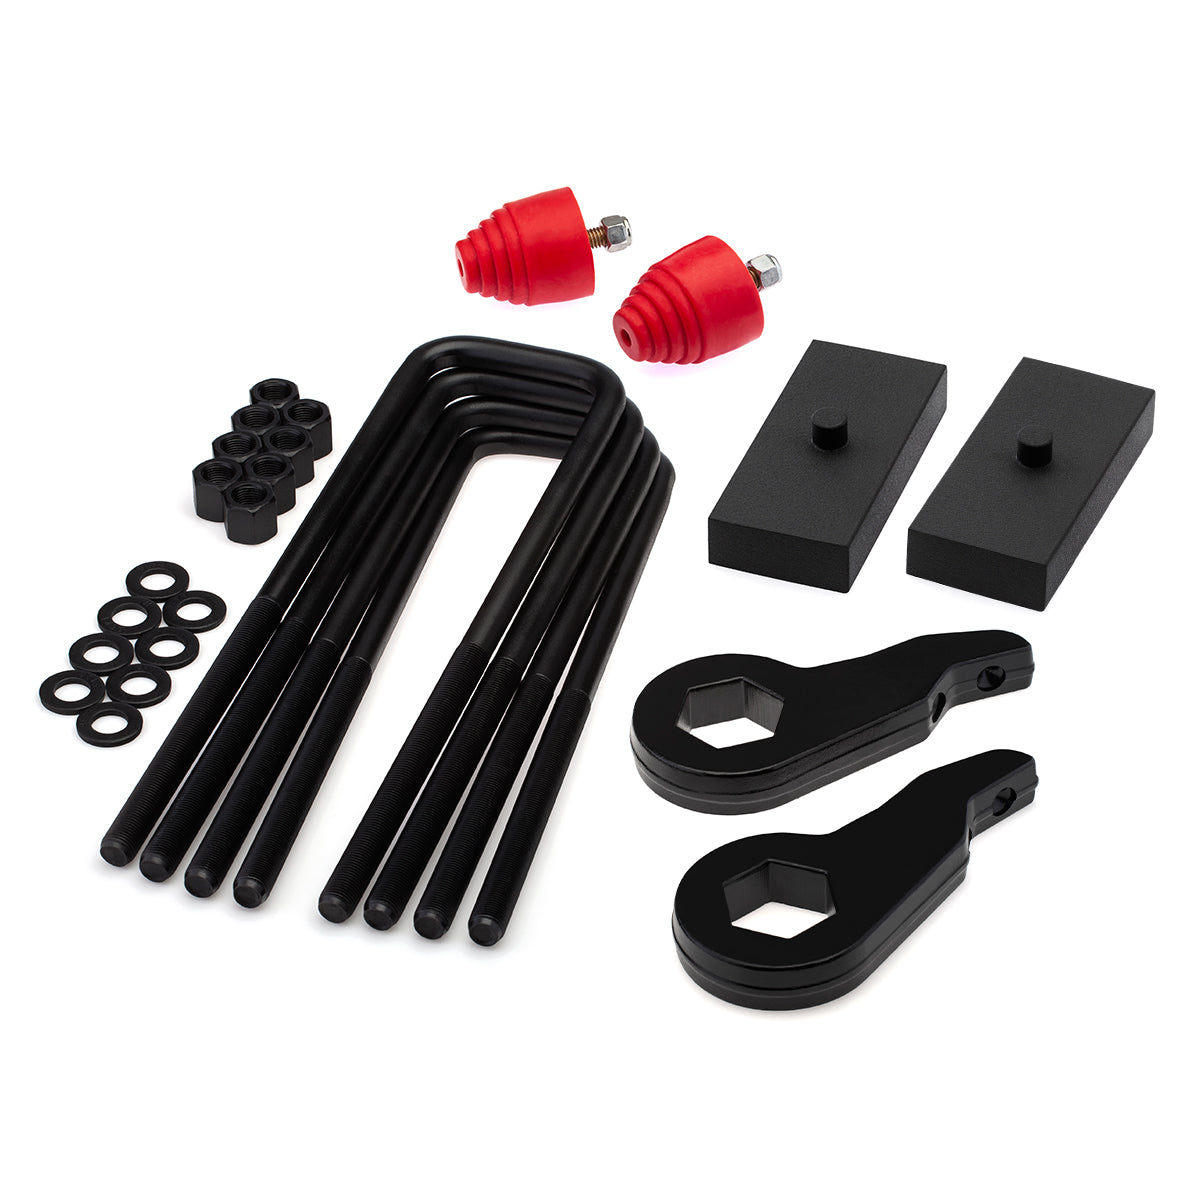 2000-2013 Chevy Suburban 2500 Full Lift Kit with Bump Stops